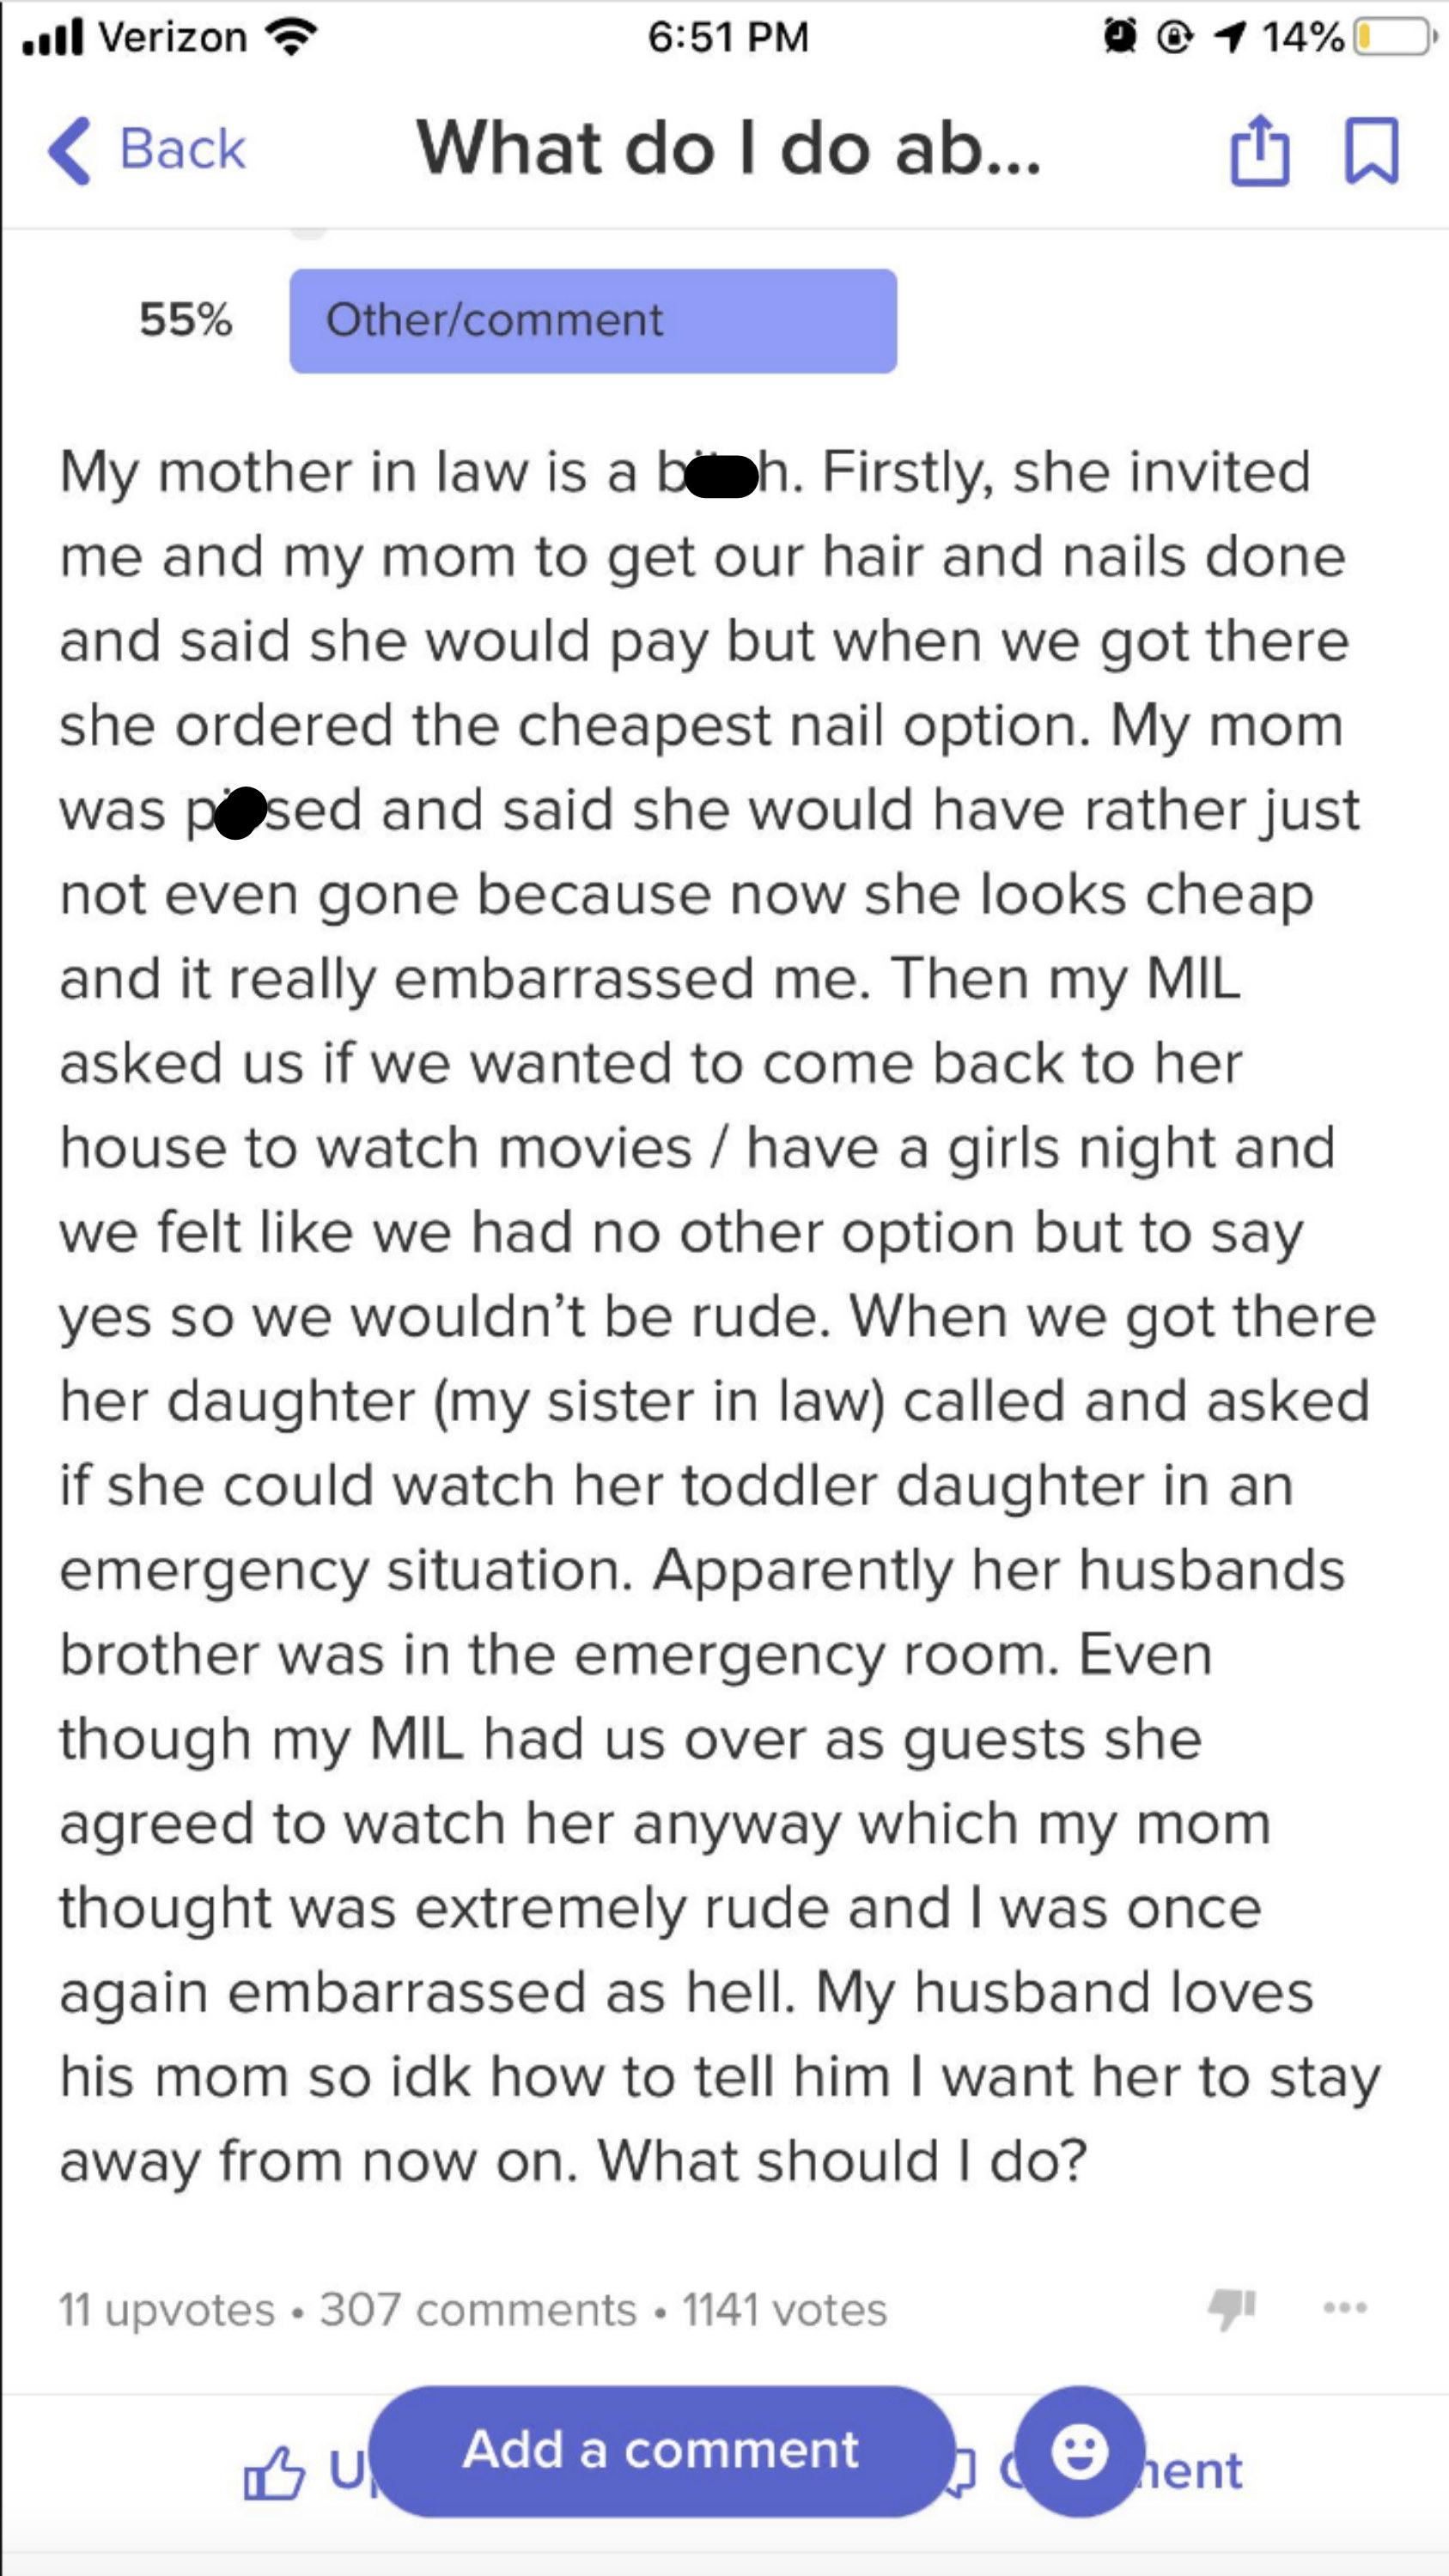 A woman complains that her mother-in-law invited her over to watch a movie and then agreed to watch her granddaughter after someone went to the emergency room